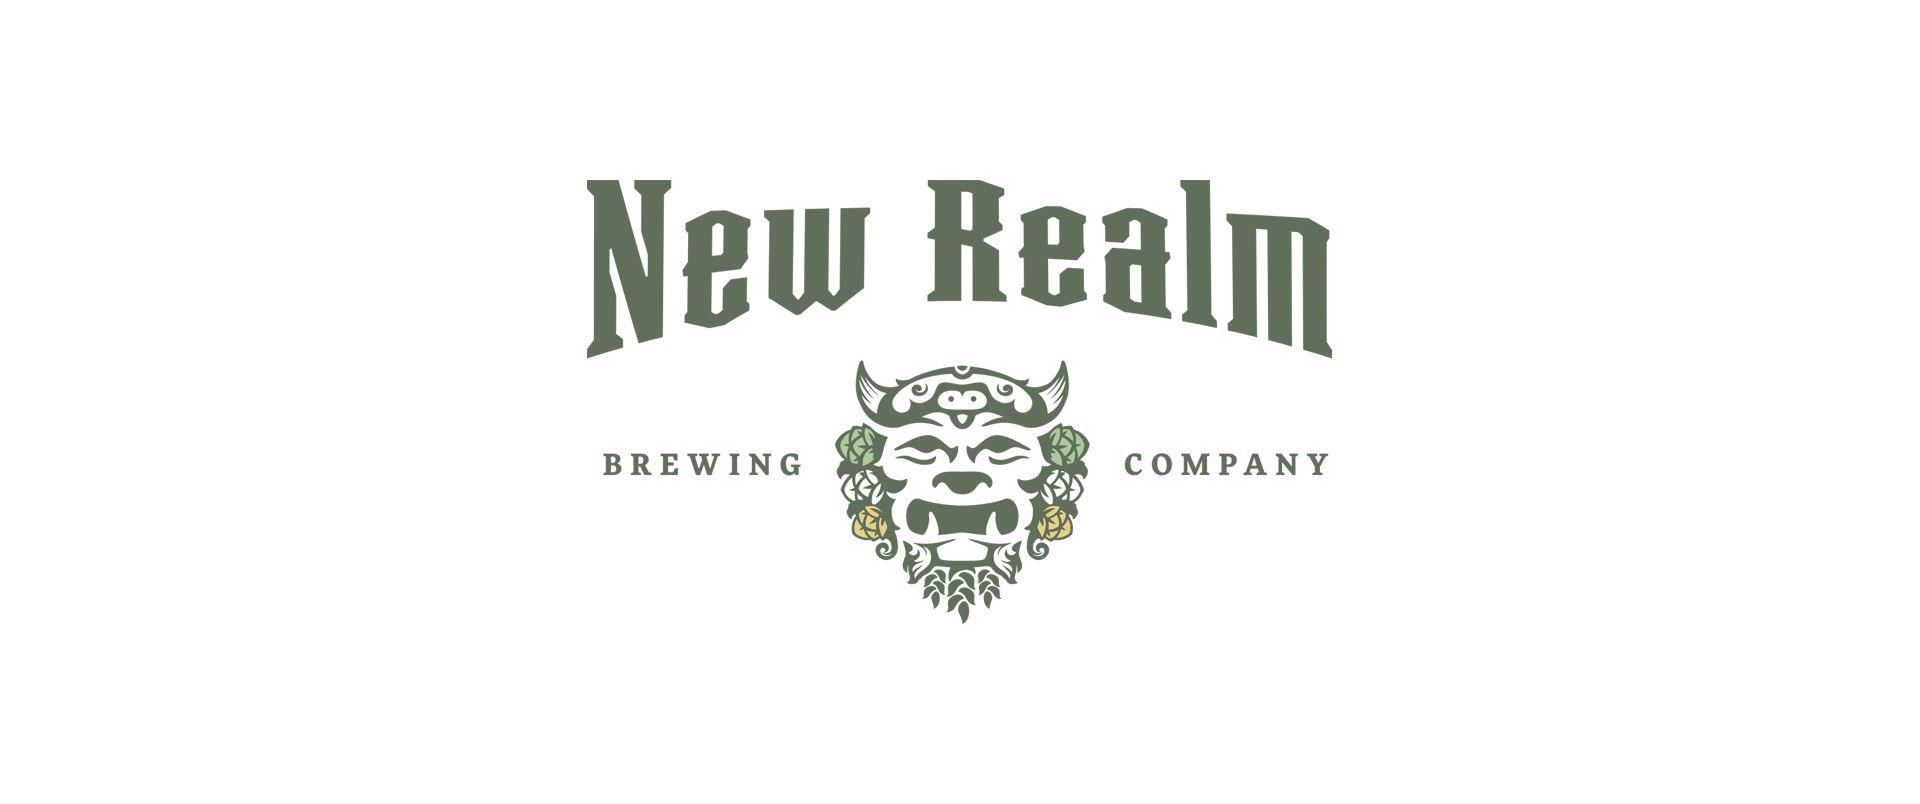 Georgia Beer Logo - New Realm Brewing Co craft beer branding, strategy, and naming - Vigor